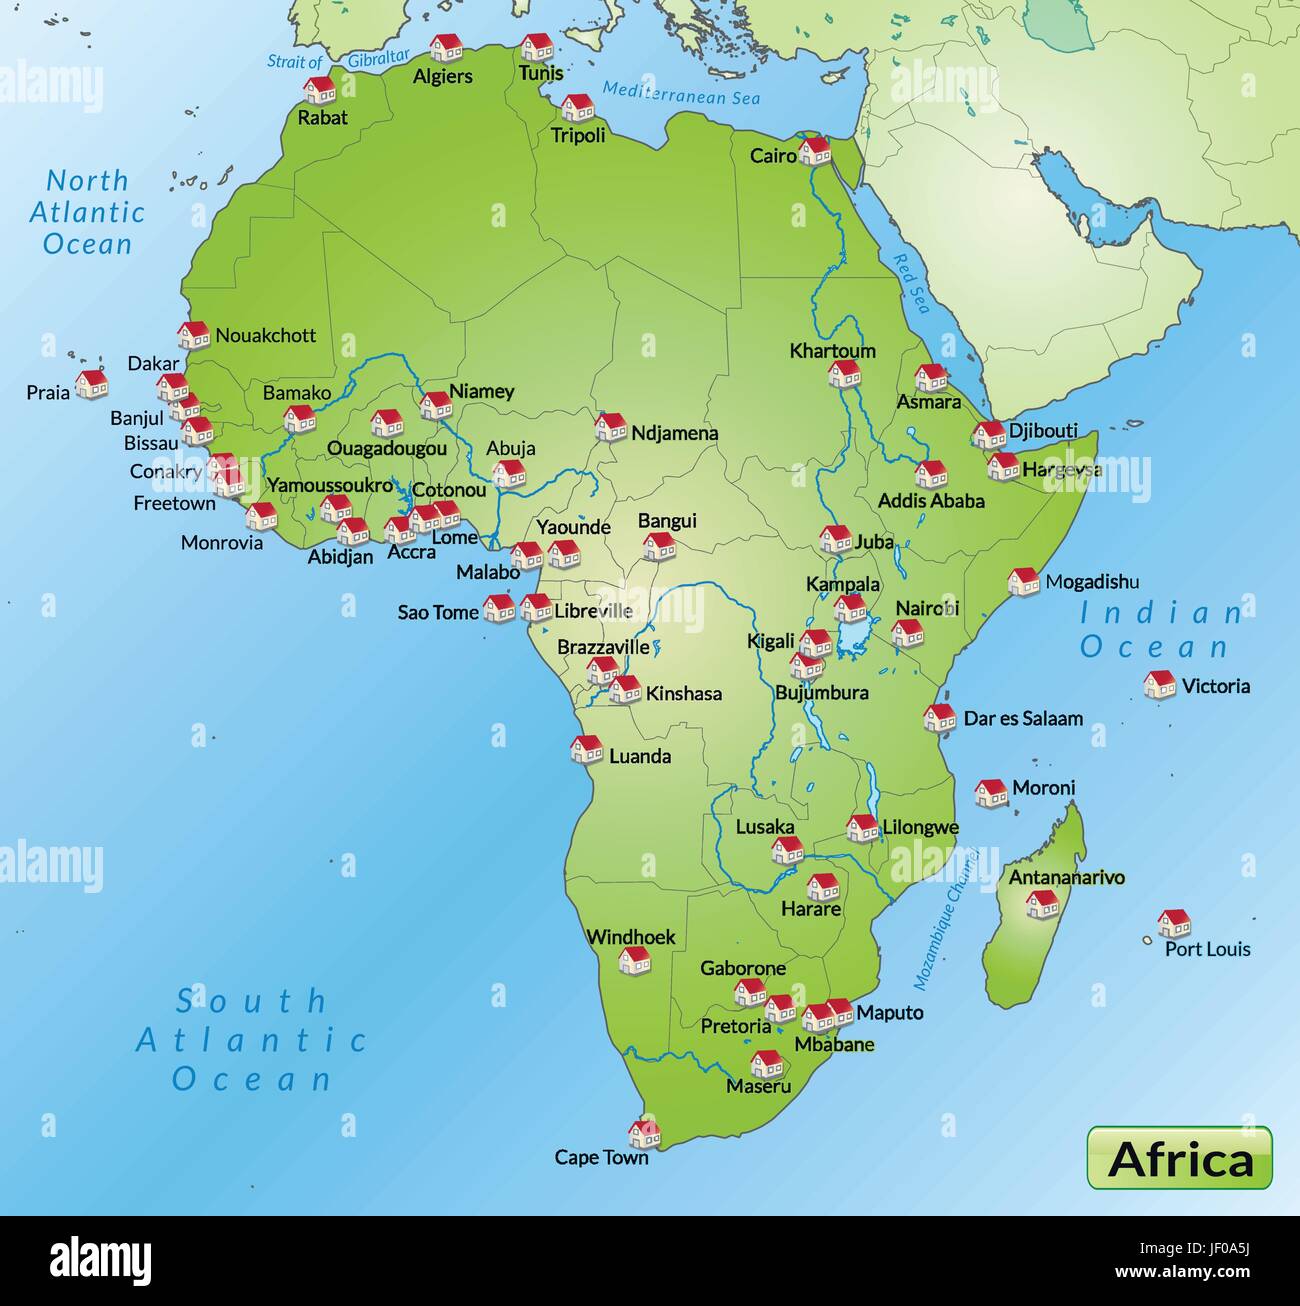 Africa Map With Borders